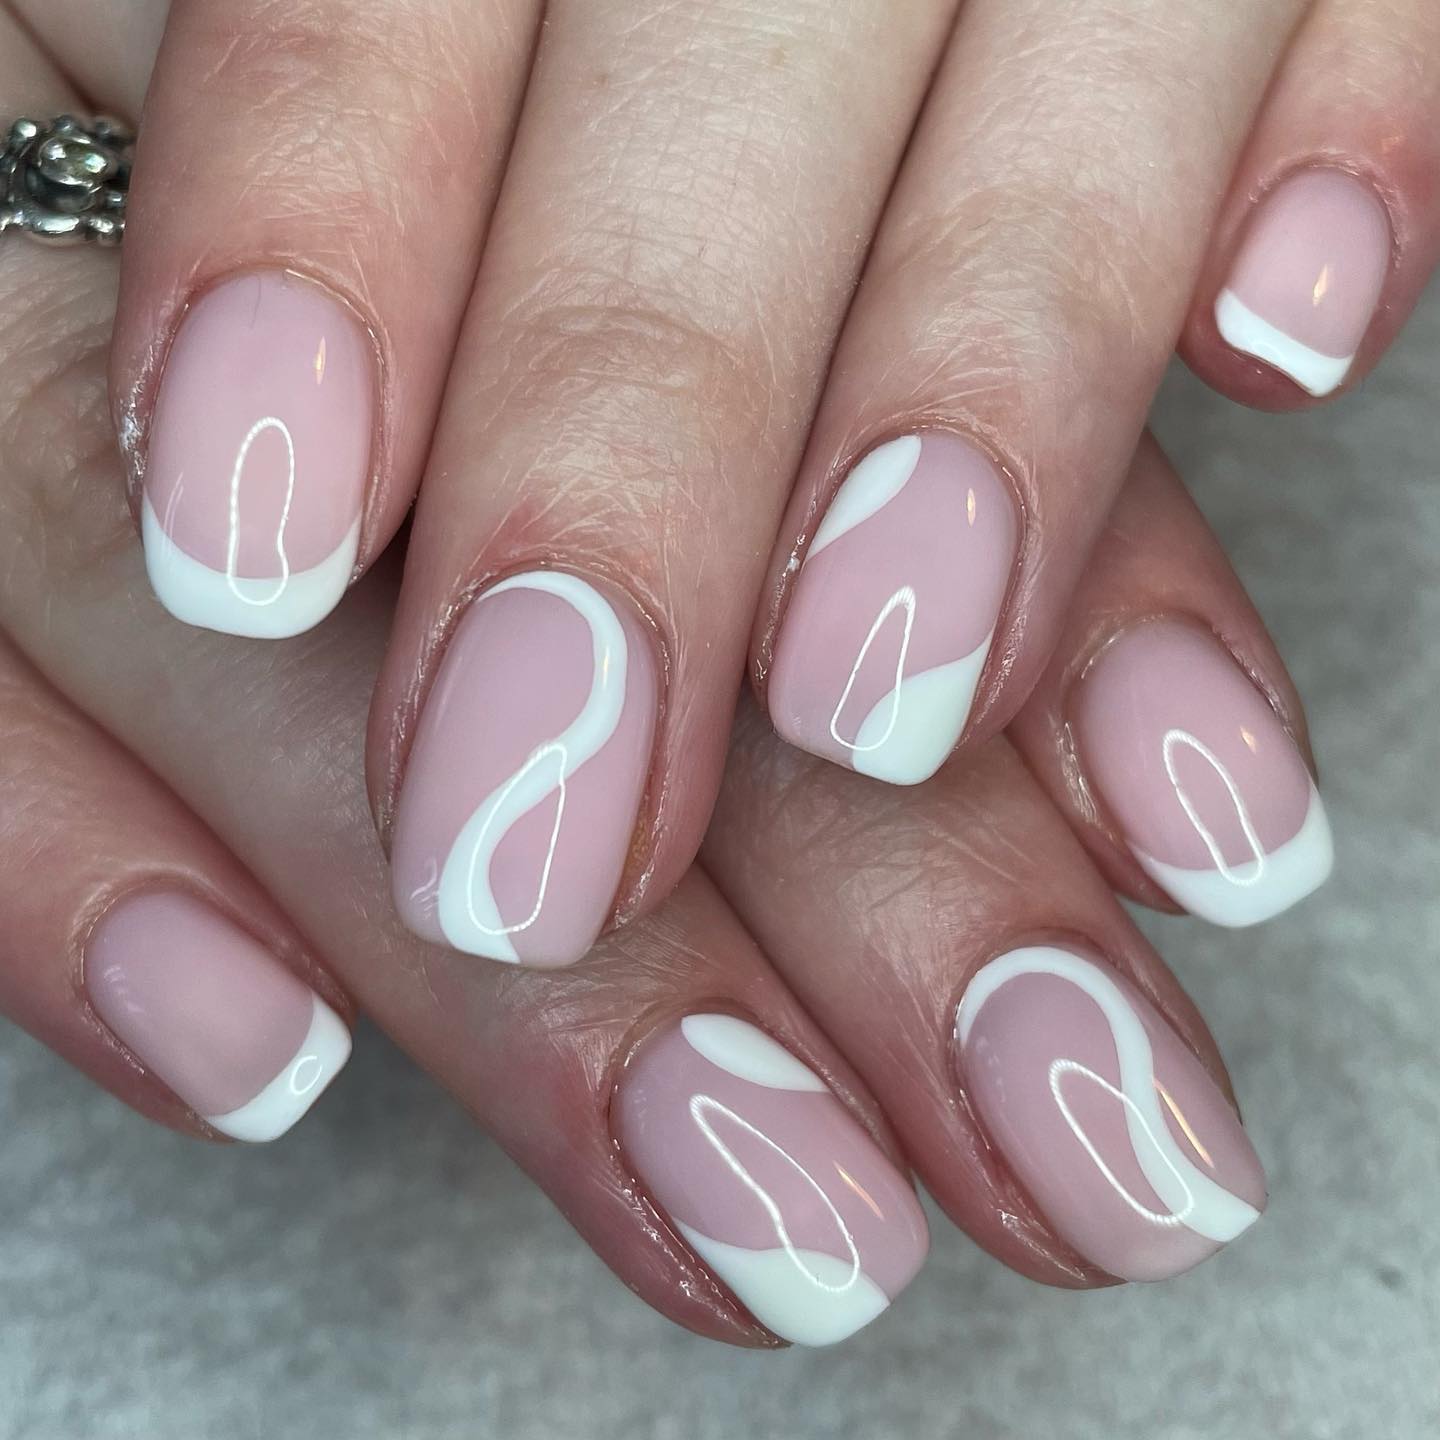 If you can't give up having a classic French mani, these swirls are for you. Big and thick swirls will go with your French mani.